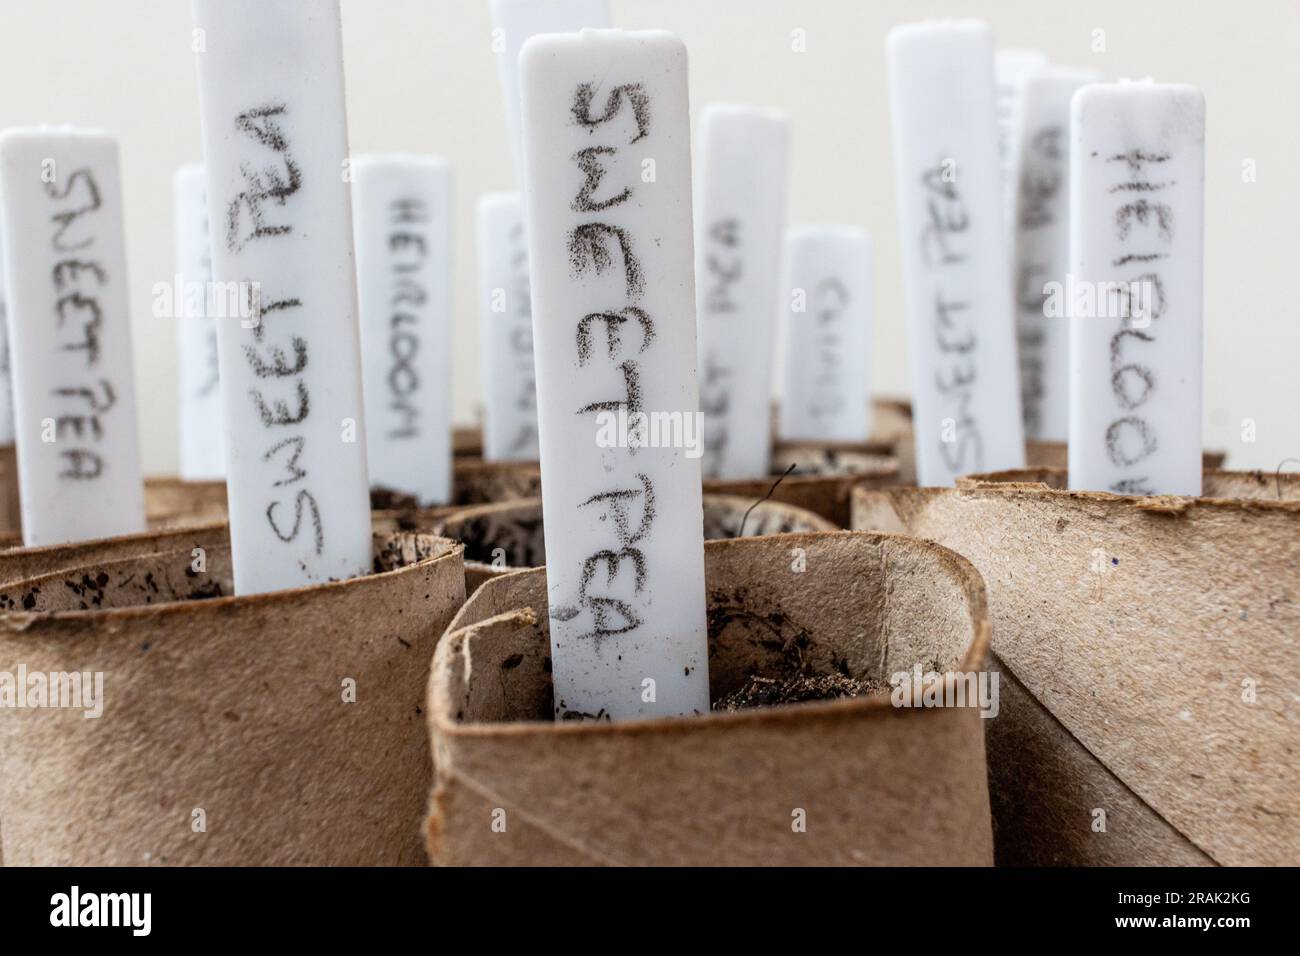 Toilet roll tubes have been reused as biodegradable plant pots for sowing sweet pea seeds. Stock Photo